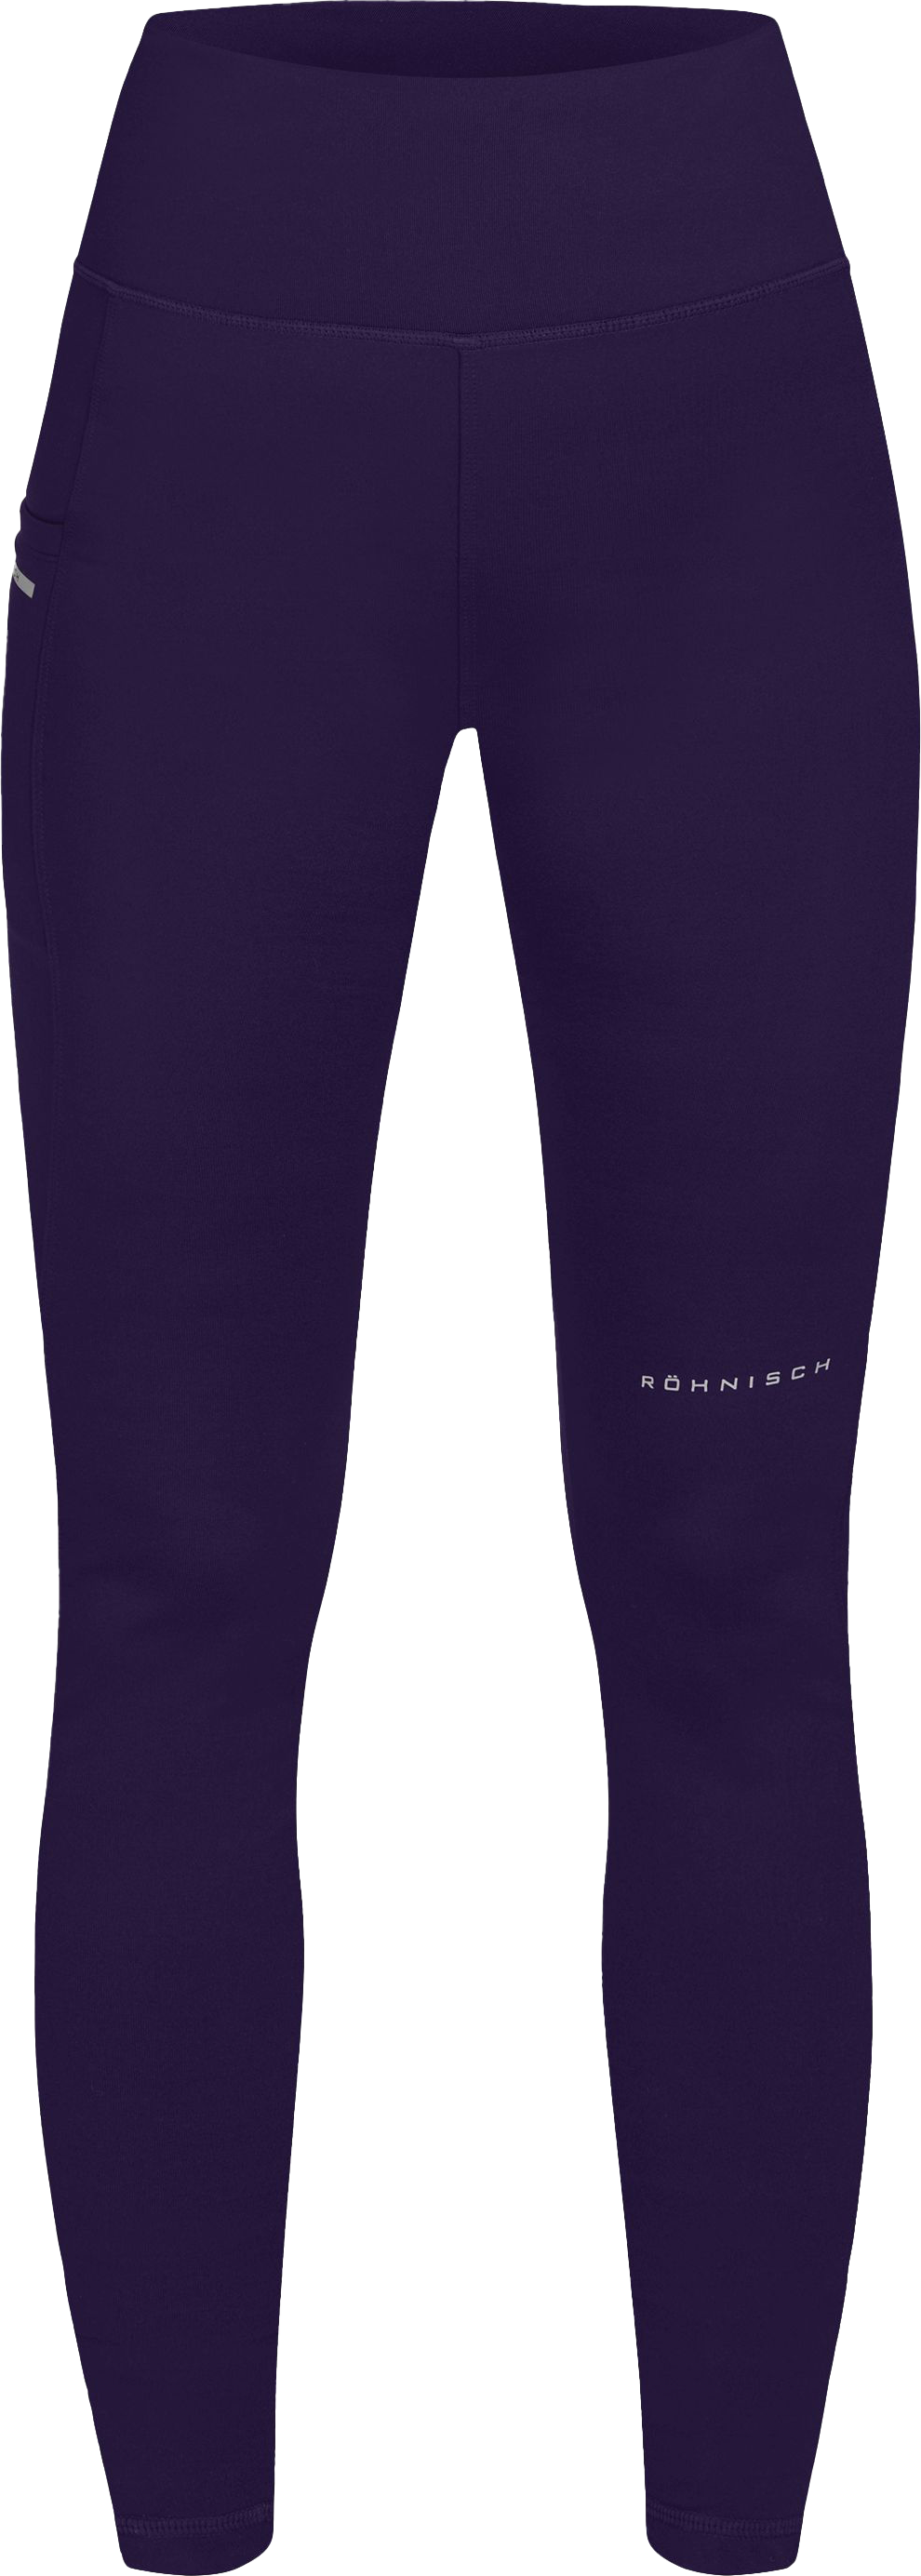 Women's Thermal Tights Blackcurrant